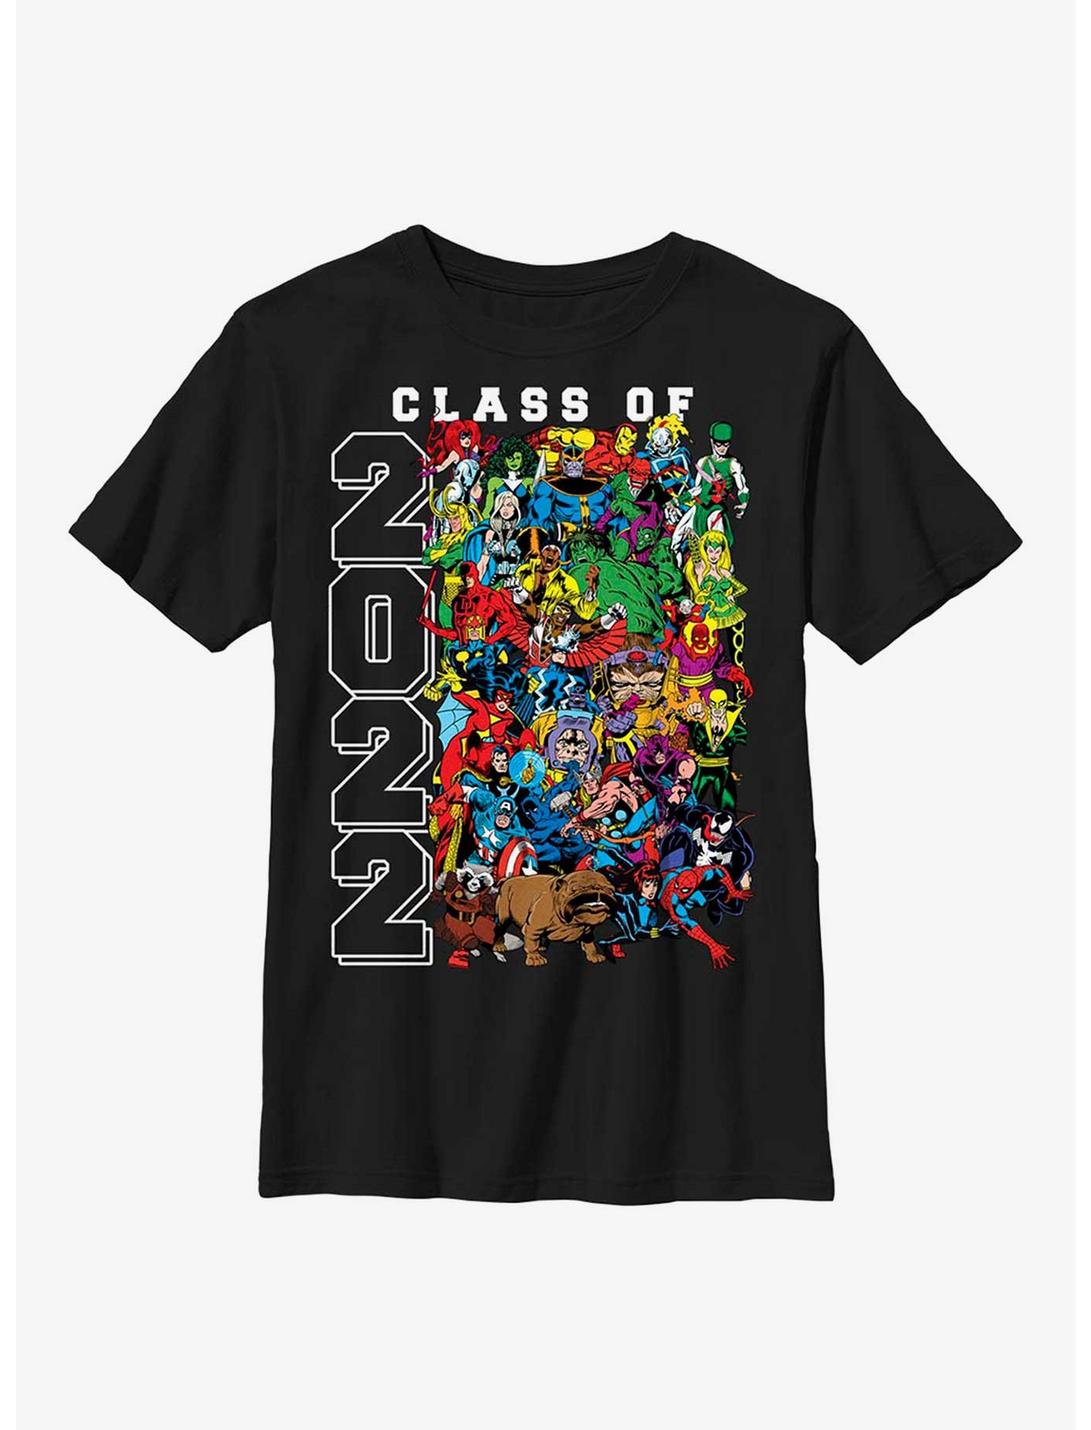 Marvel All Class Of 2022 Youth T-Shirt, BLACK, hi-res